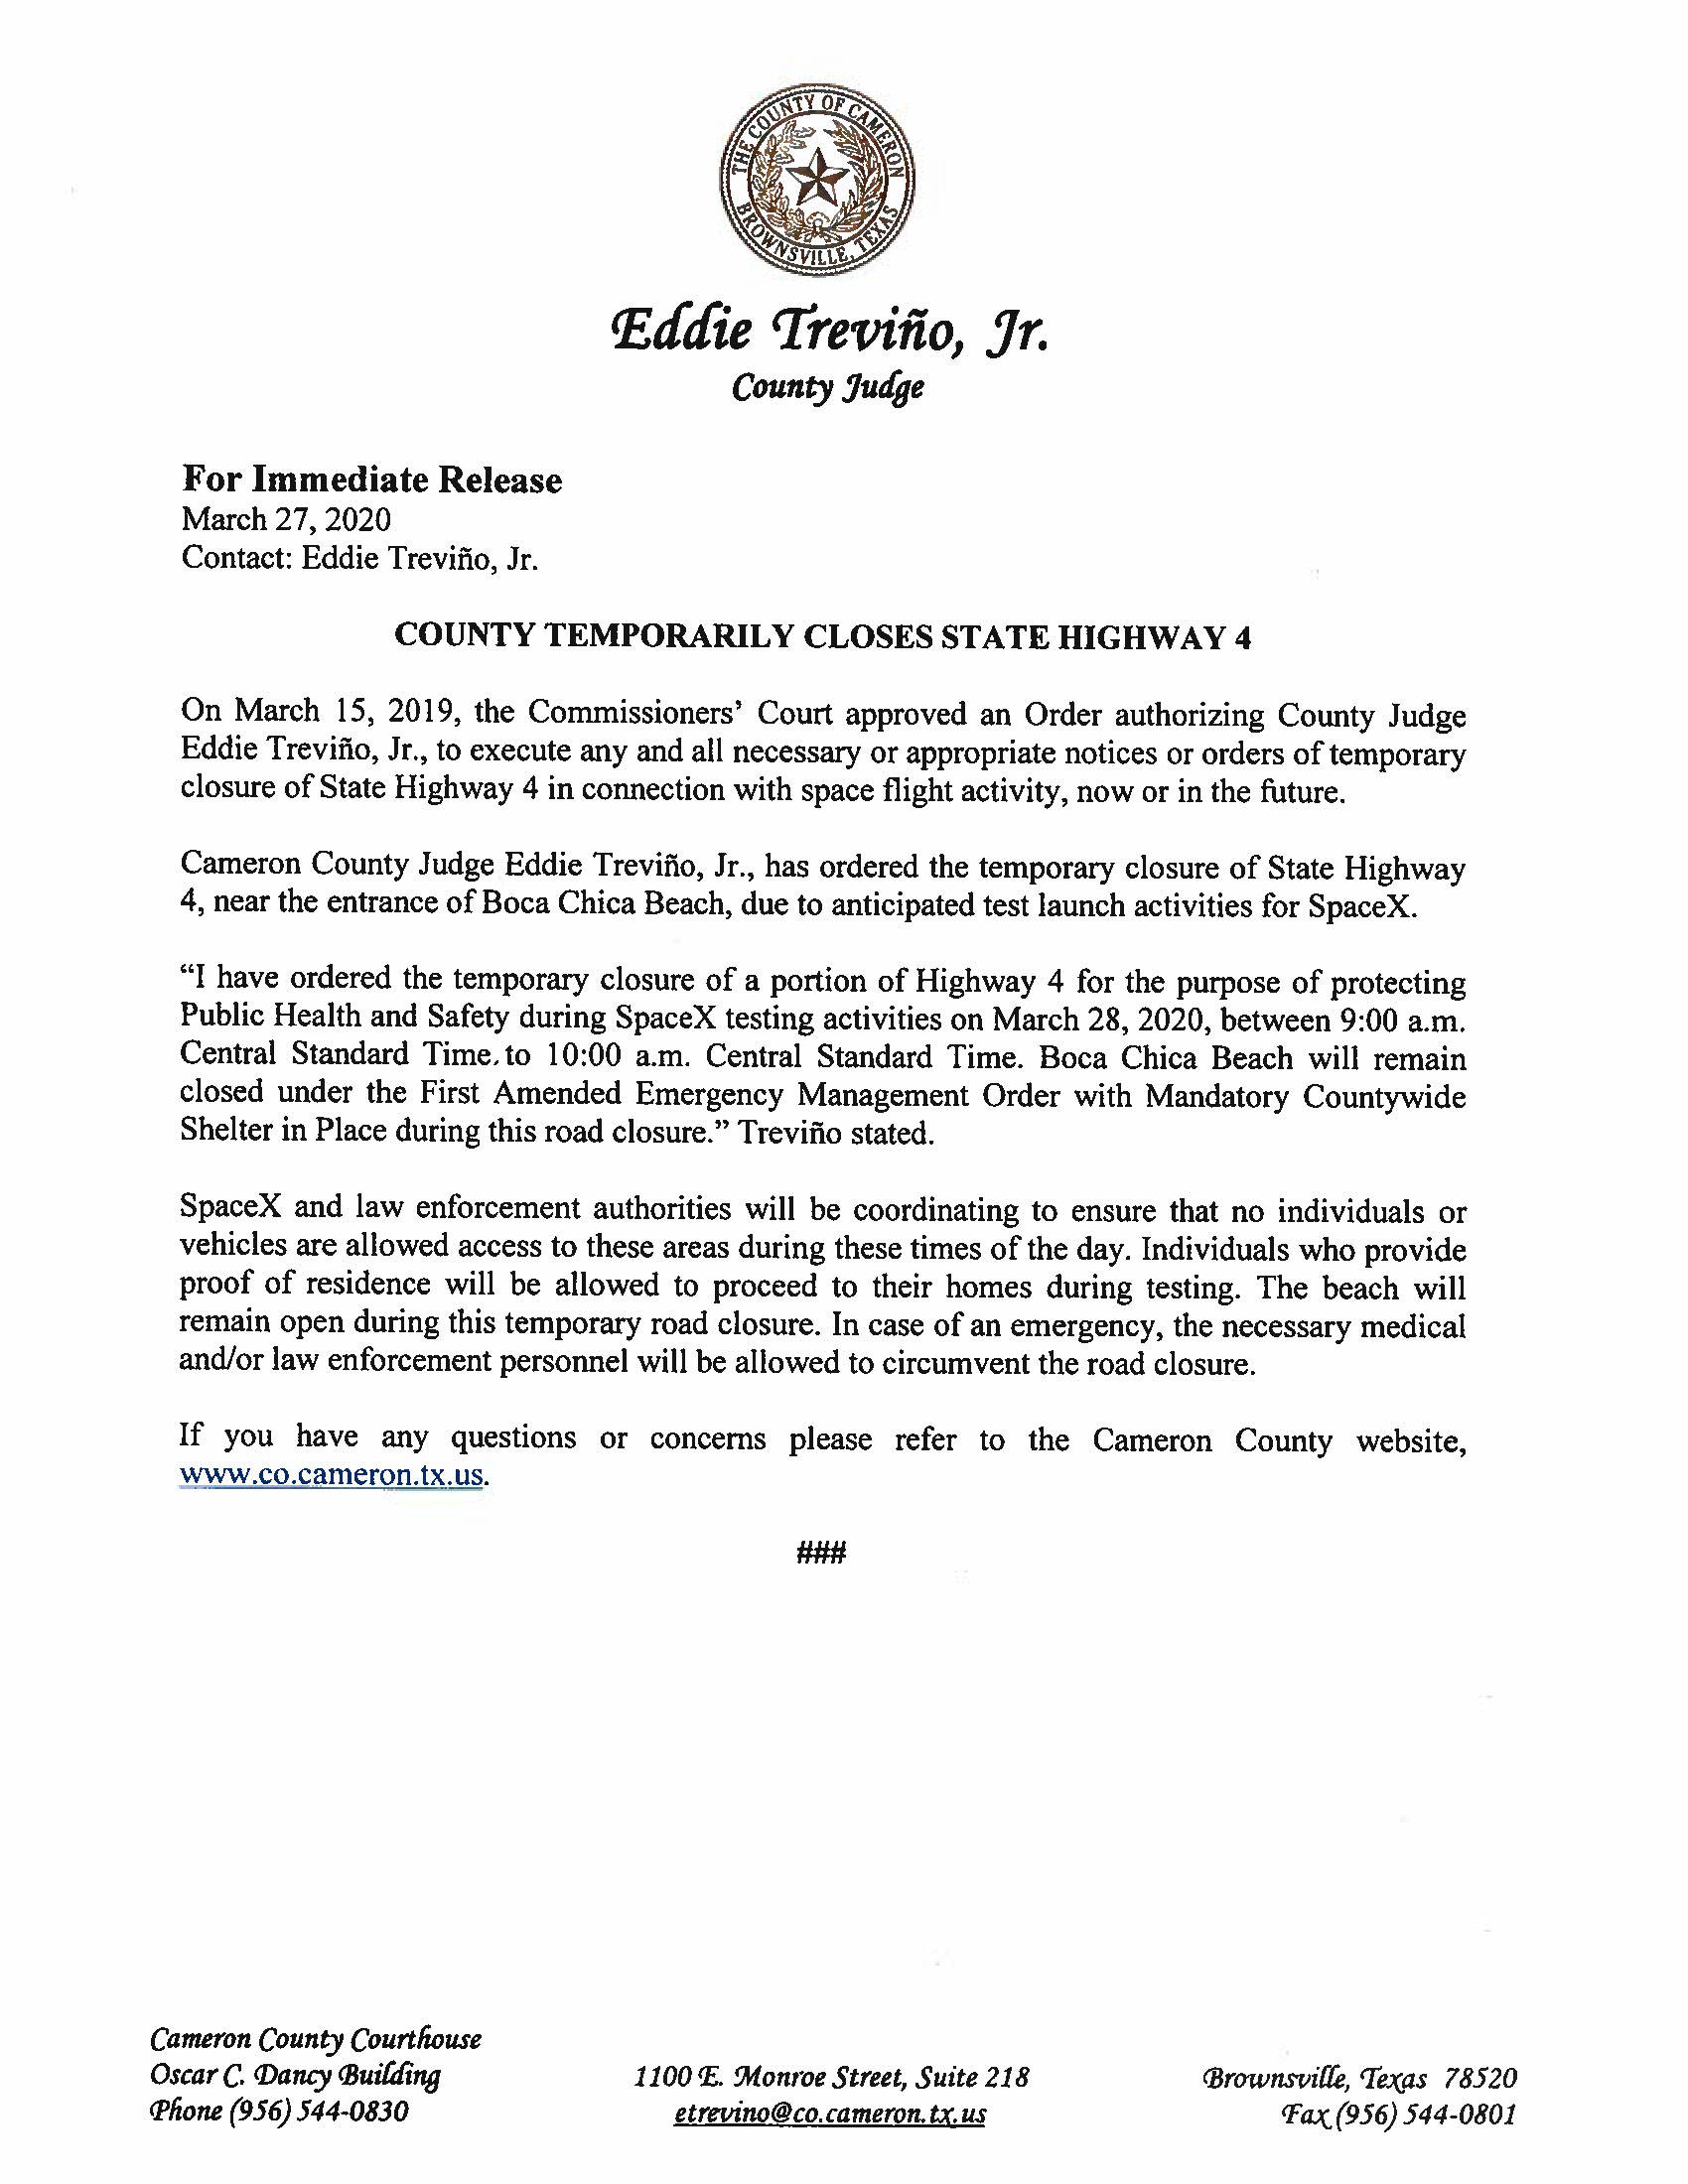 Press Release English Spanish For 03.28.2020.State Hwy 4 Closure Only Page 1